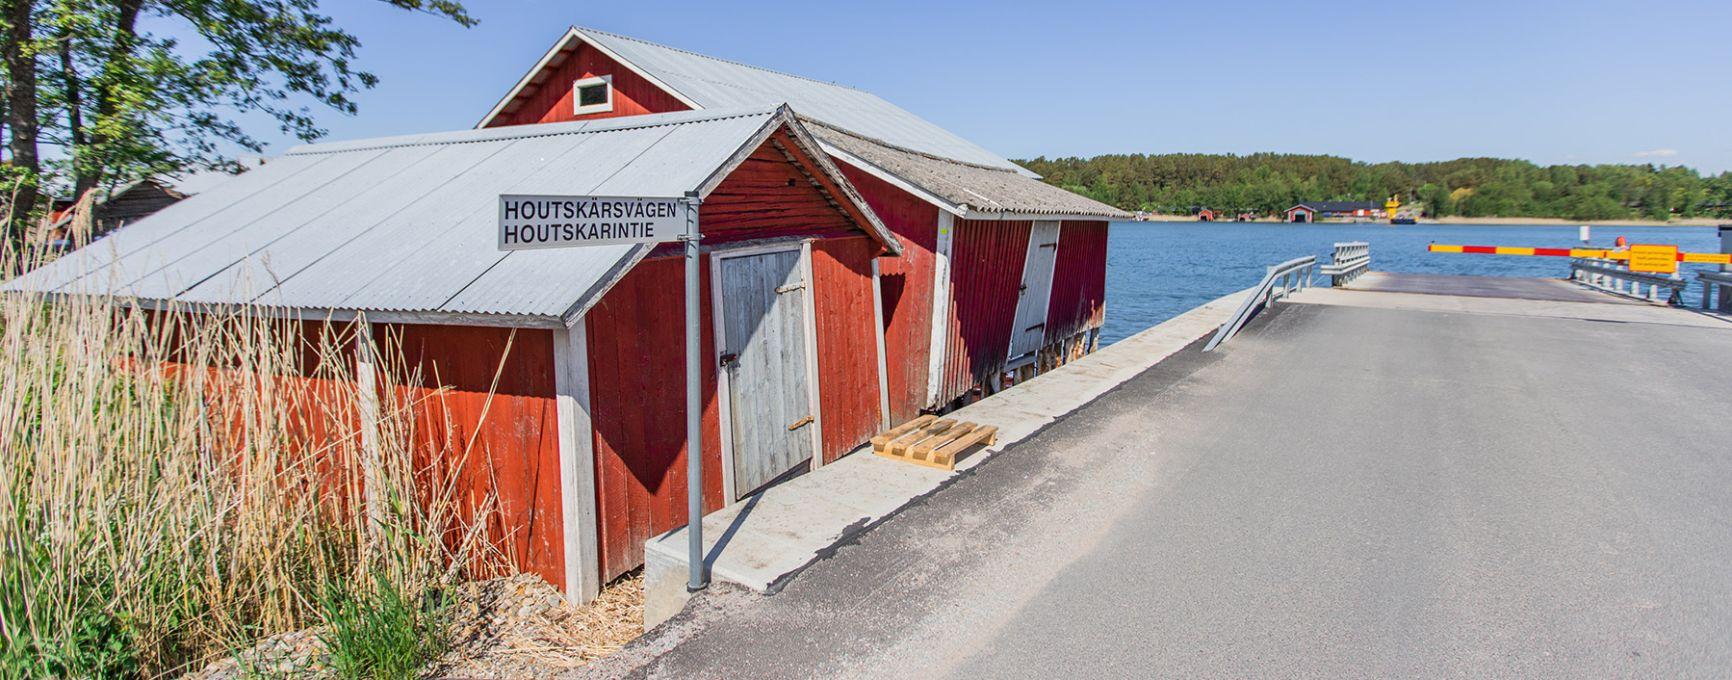 A ferry stop on Houtskär, next to a traditional wooden building.